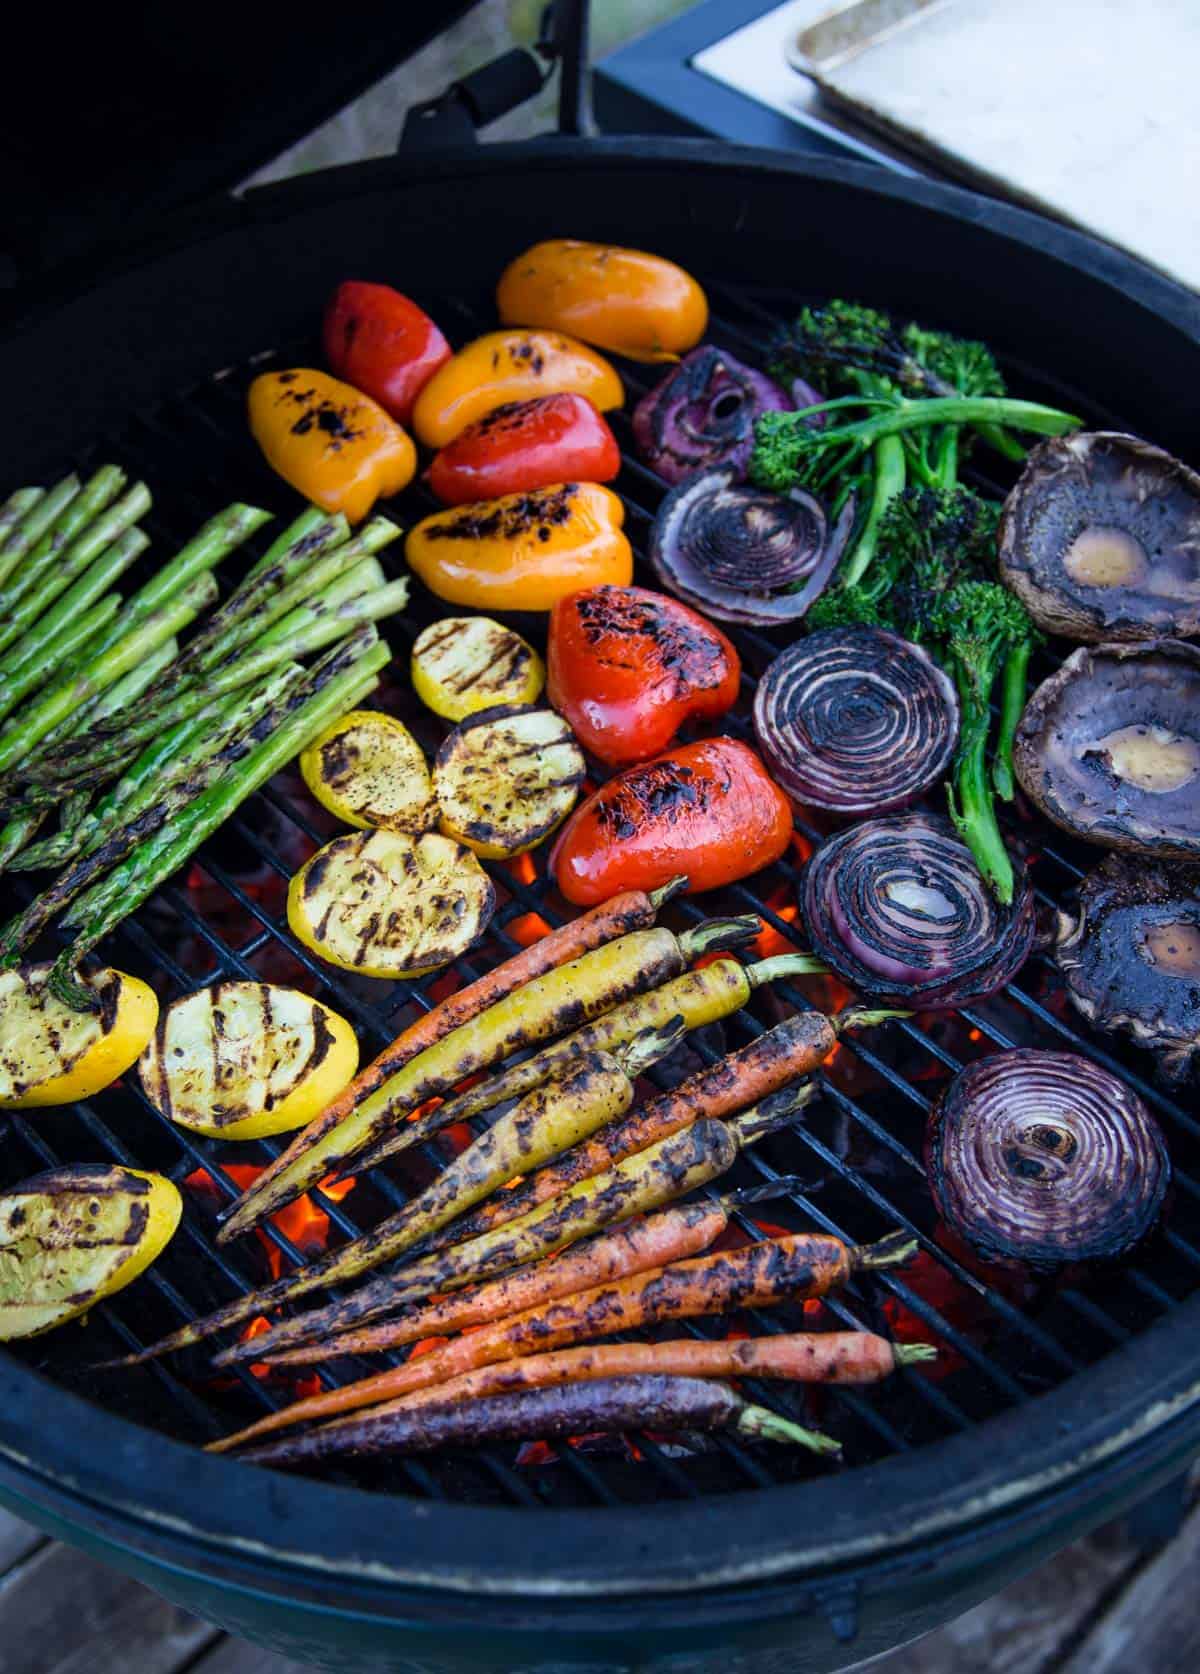 How to grill any vegetable